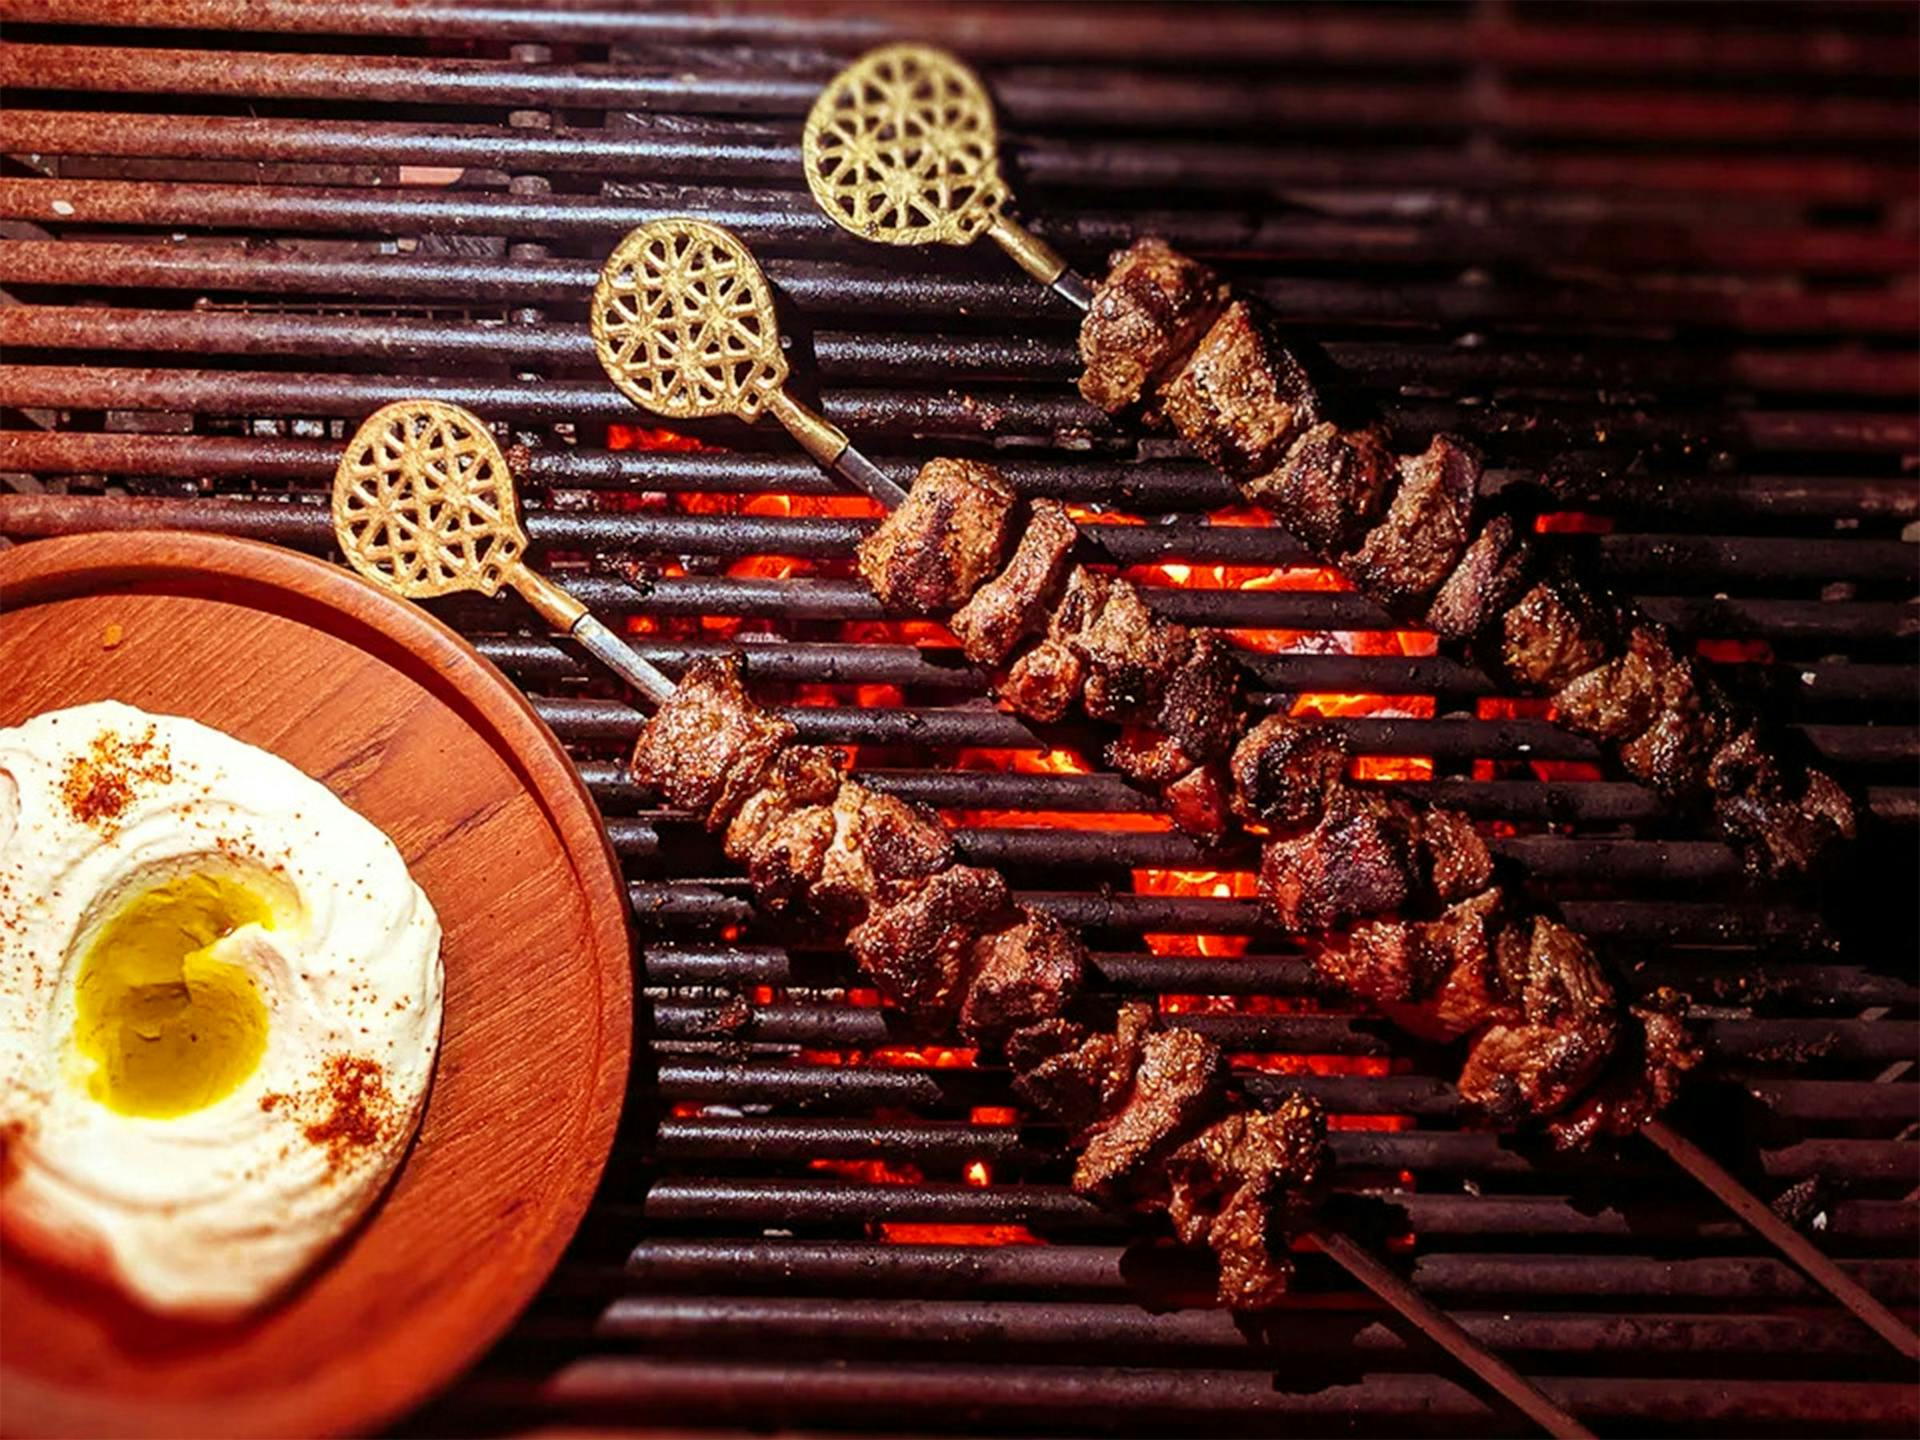 Three lamb kebabs on the grill with a side of hummus